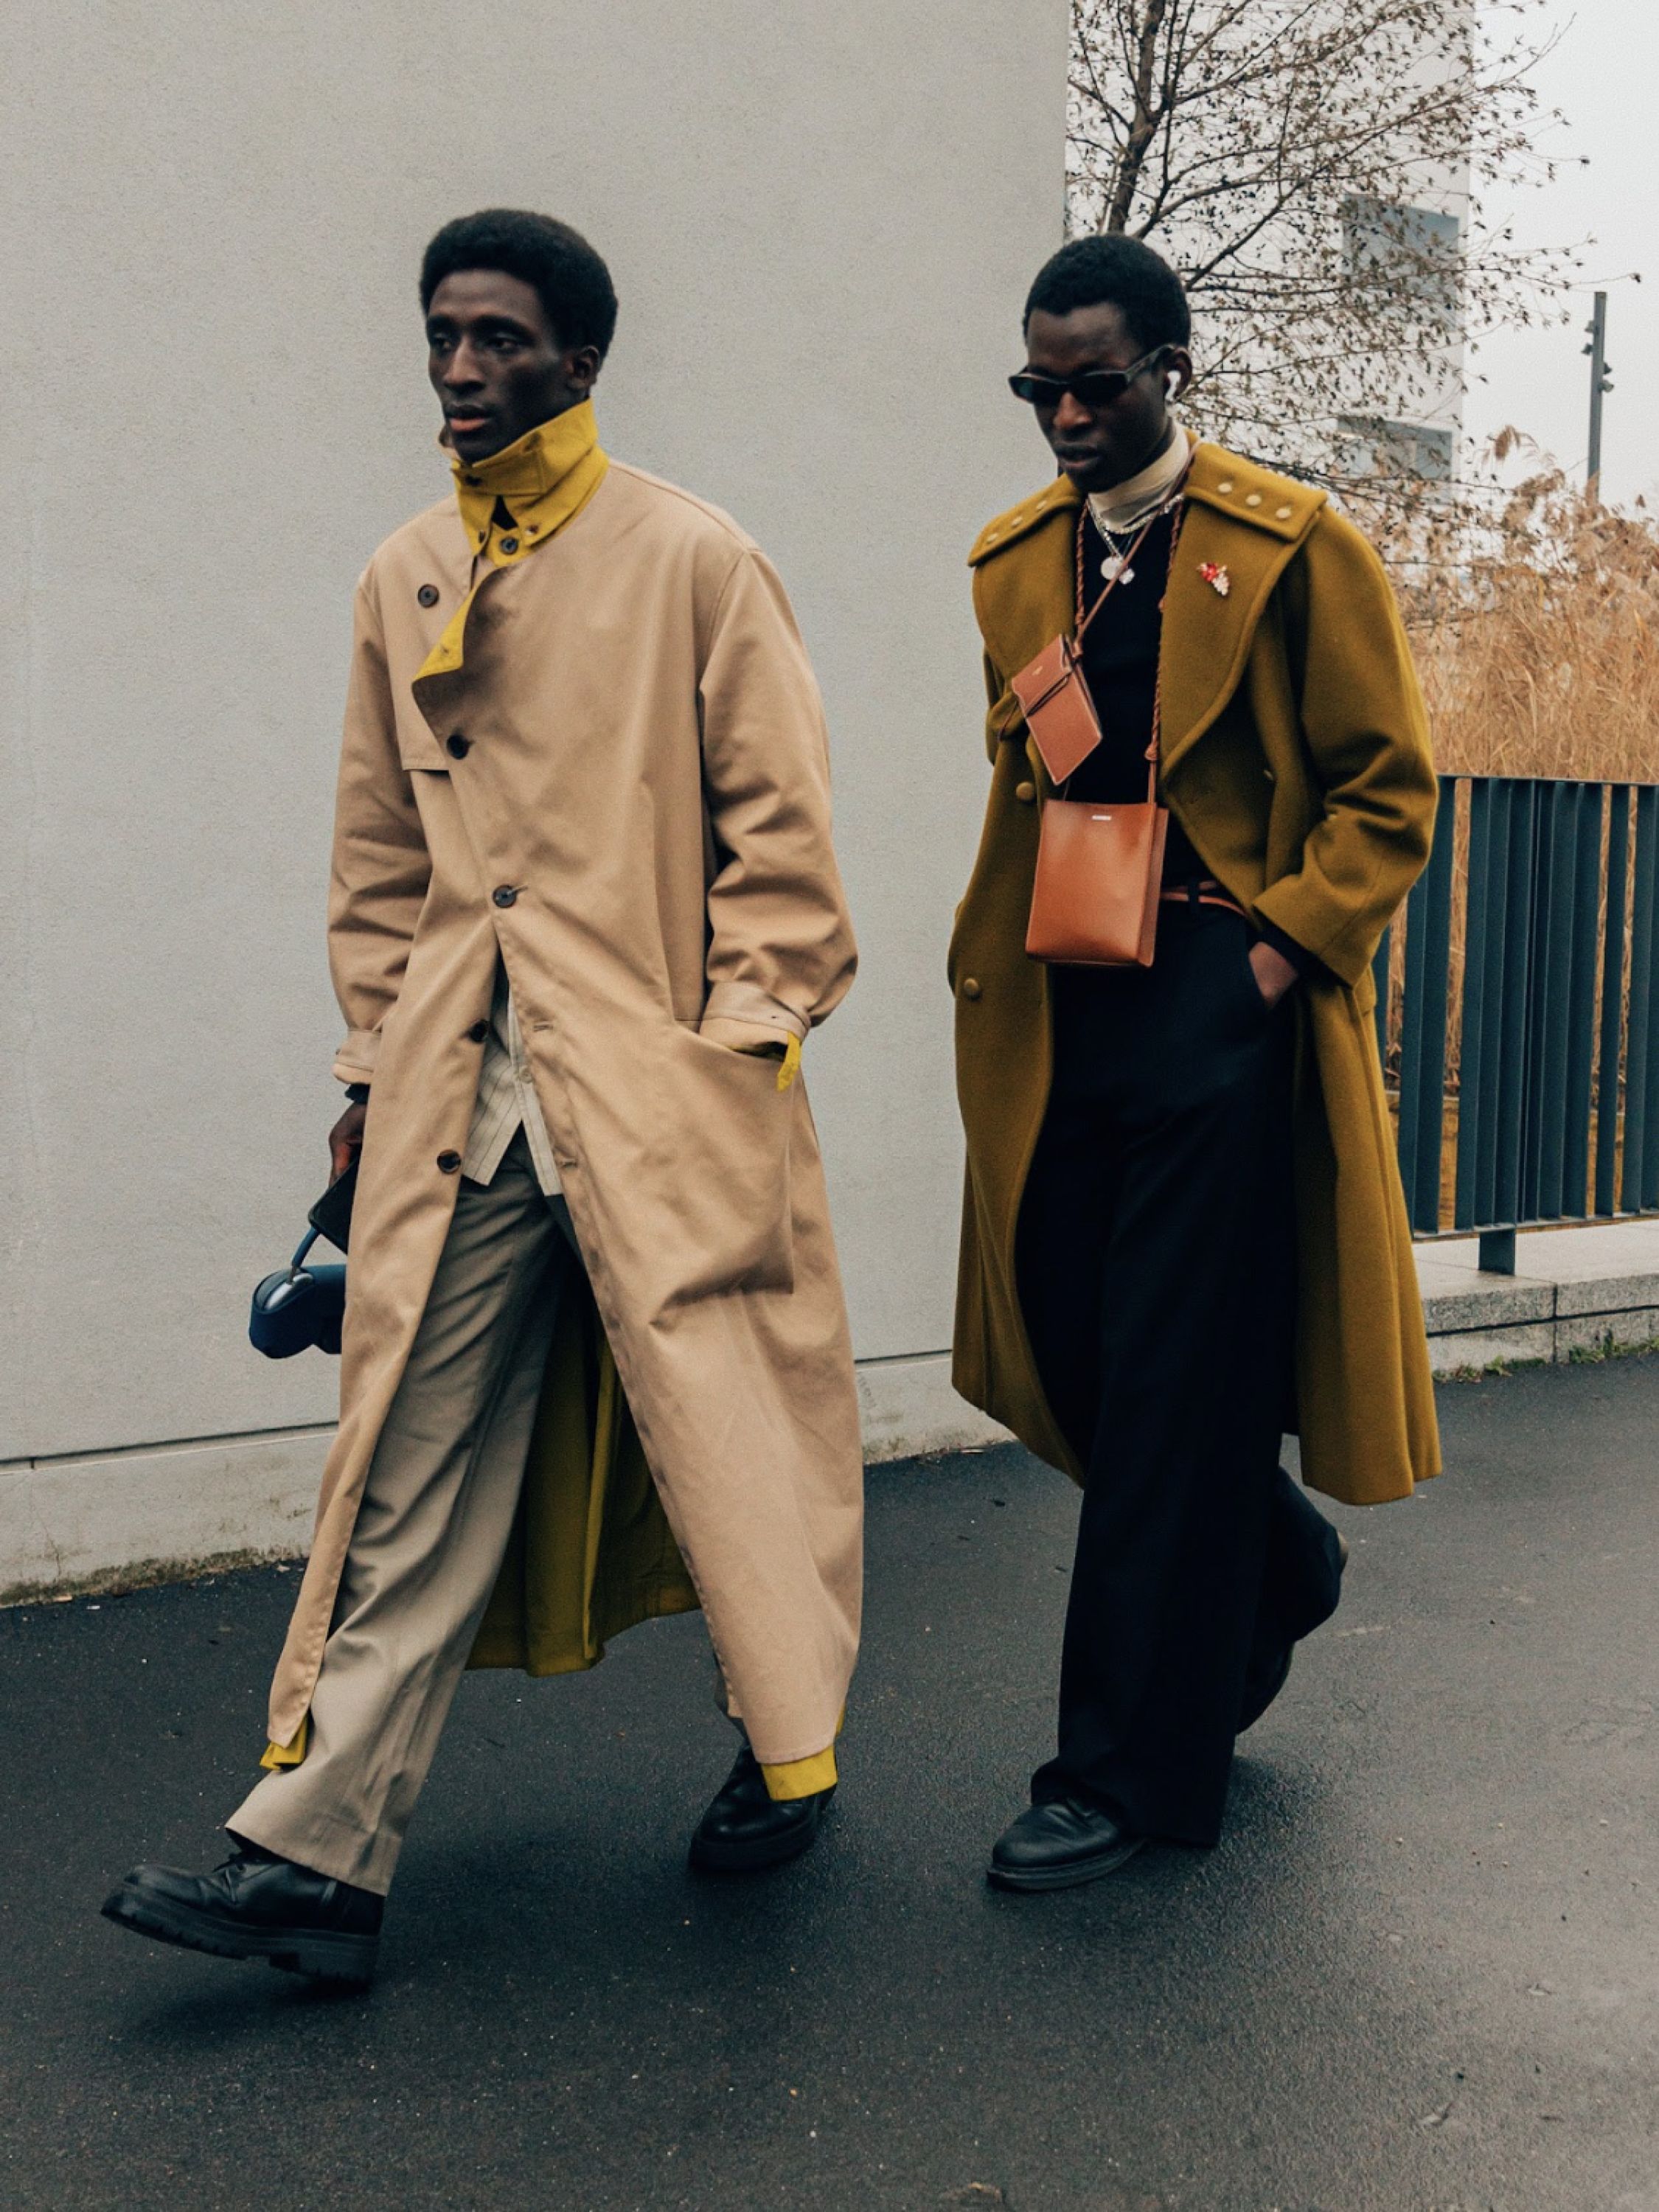 Louis Vuitton FW23 Mens' Collection Celebrates Never Growing Up